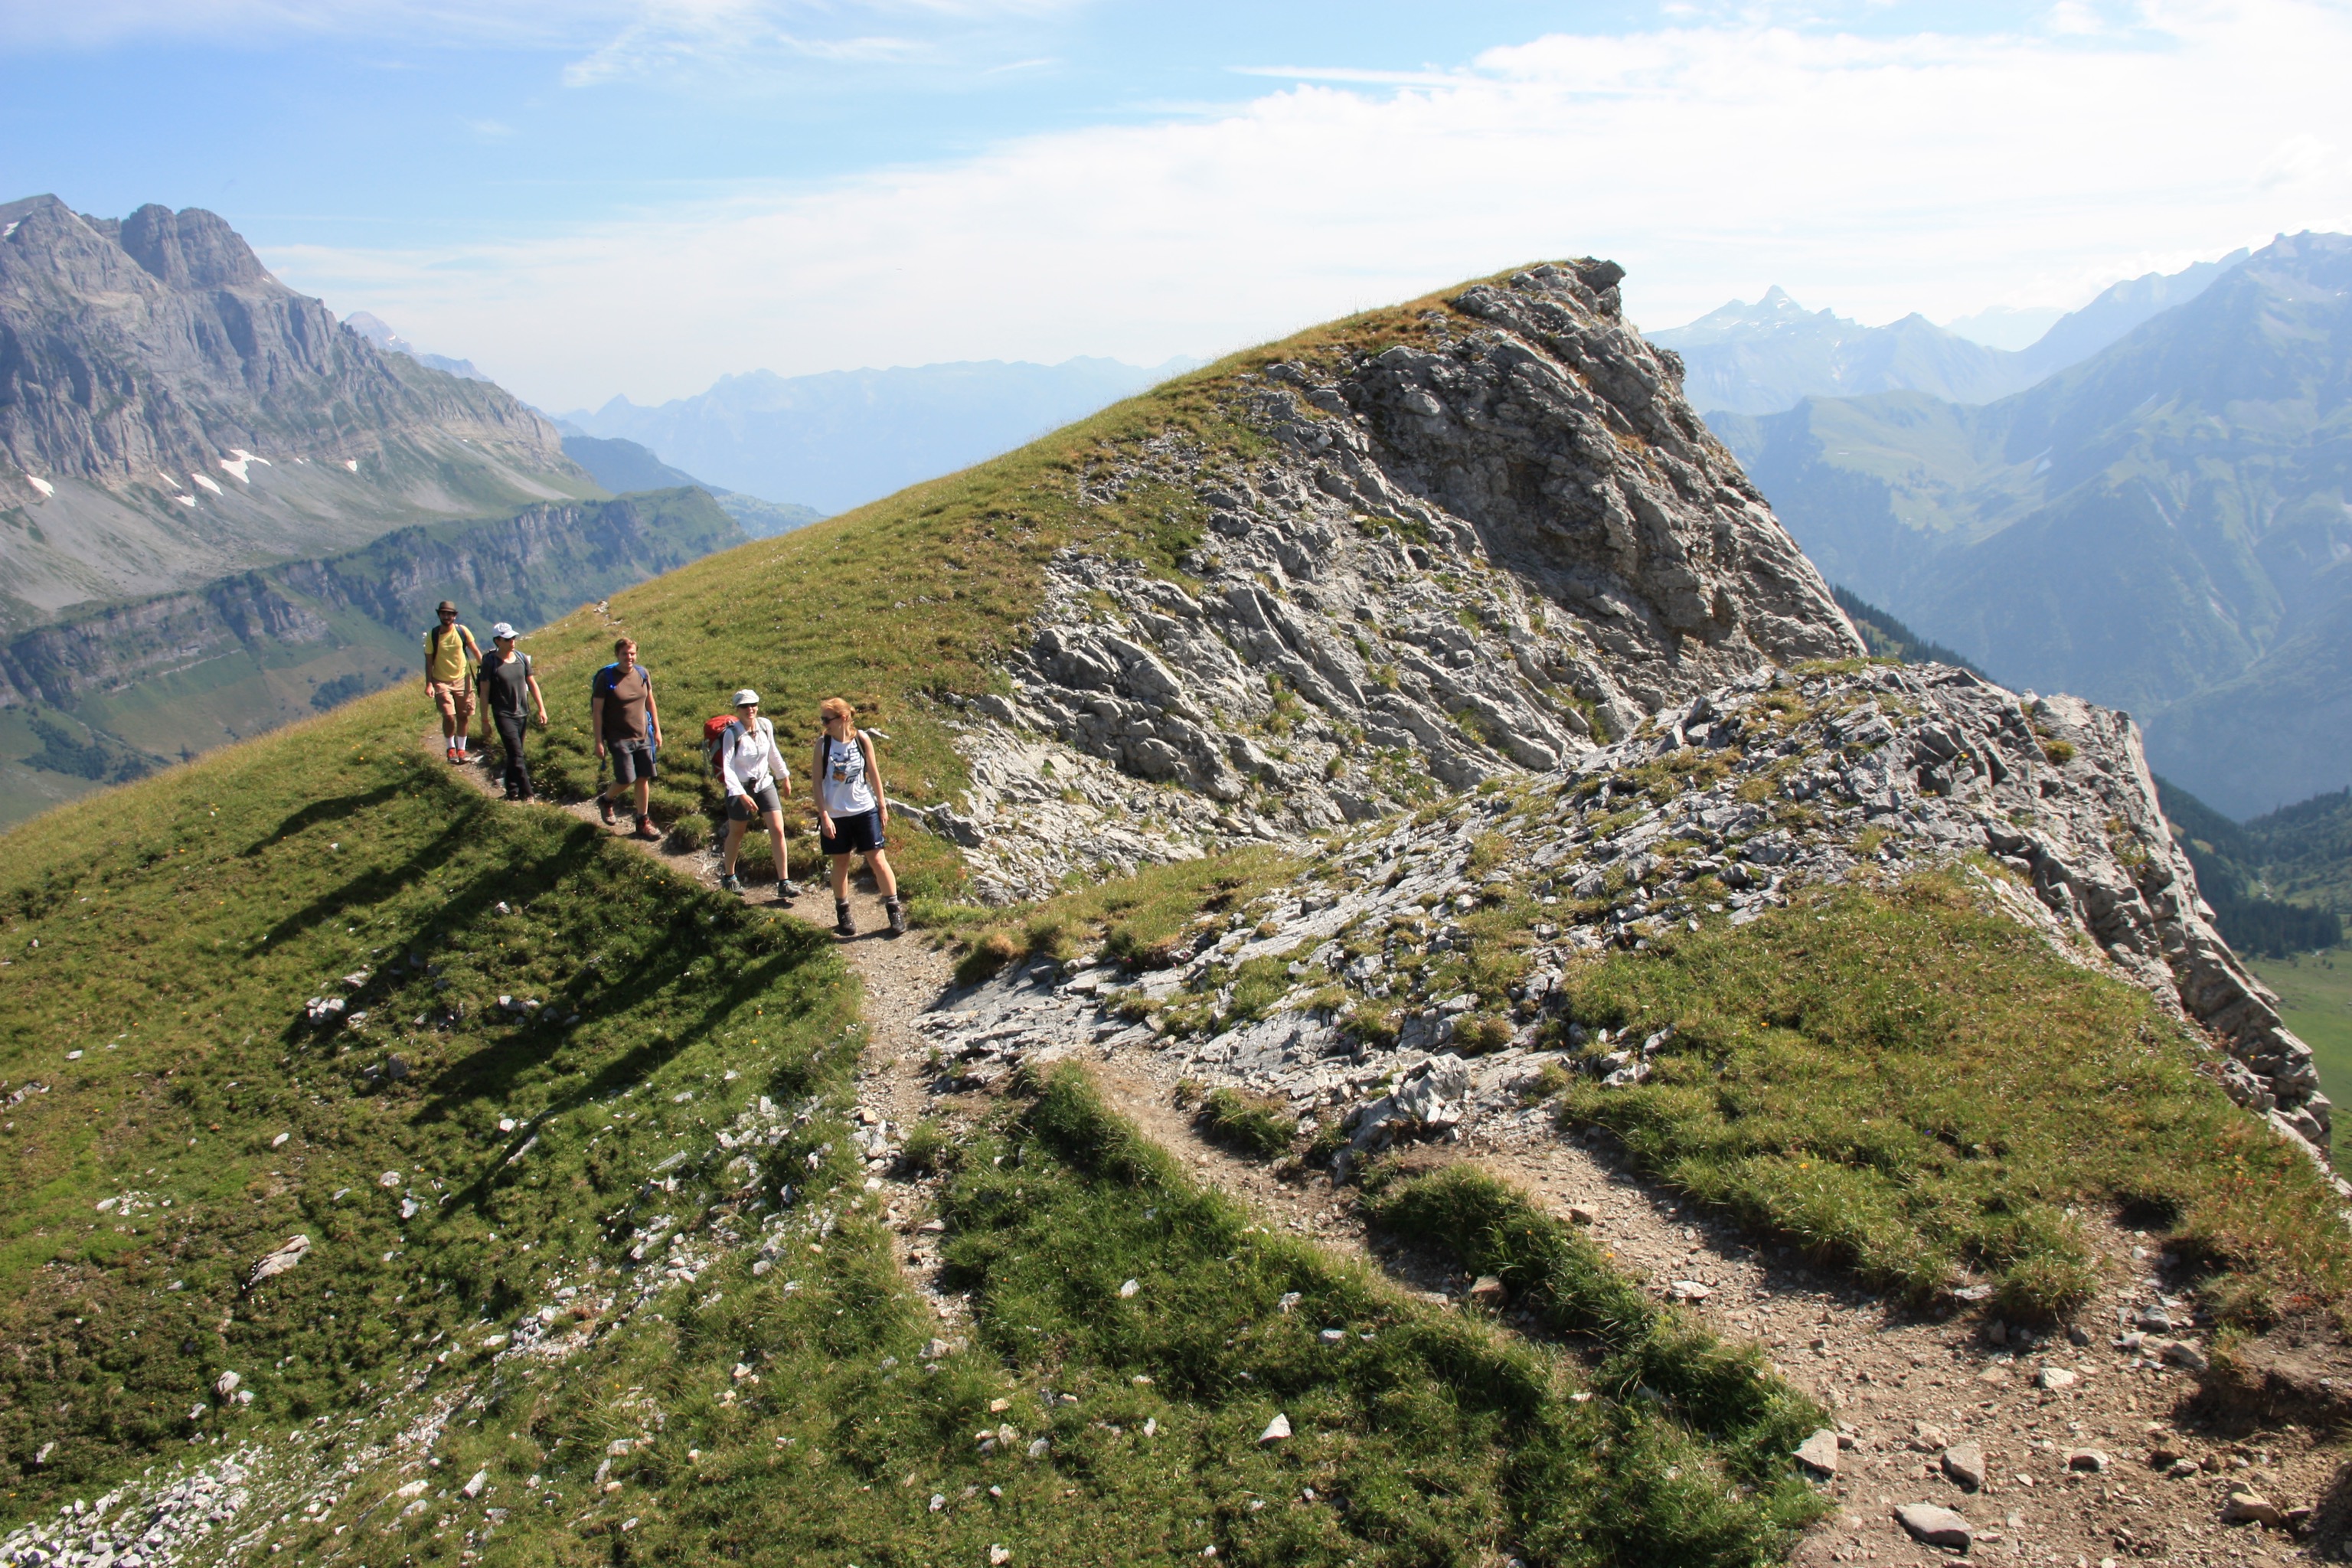 A gorgeous day to climb a peak in the Glarus alps. The first part of the trail led us out of the urnerboden valley along the edge of an escarpment.